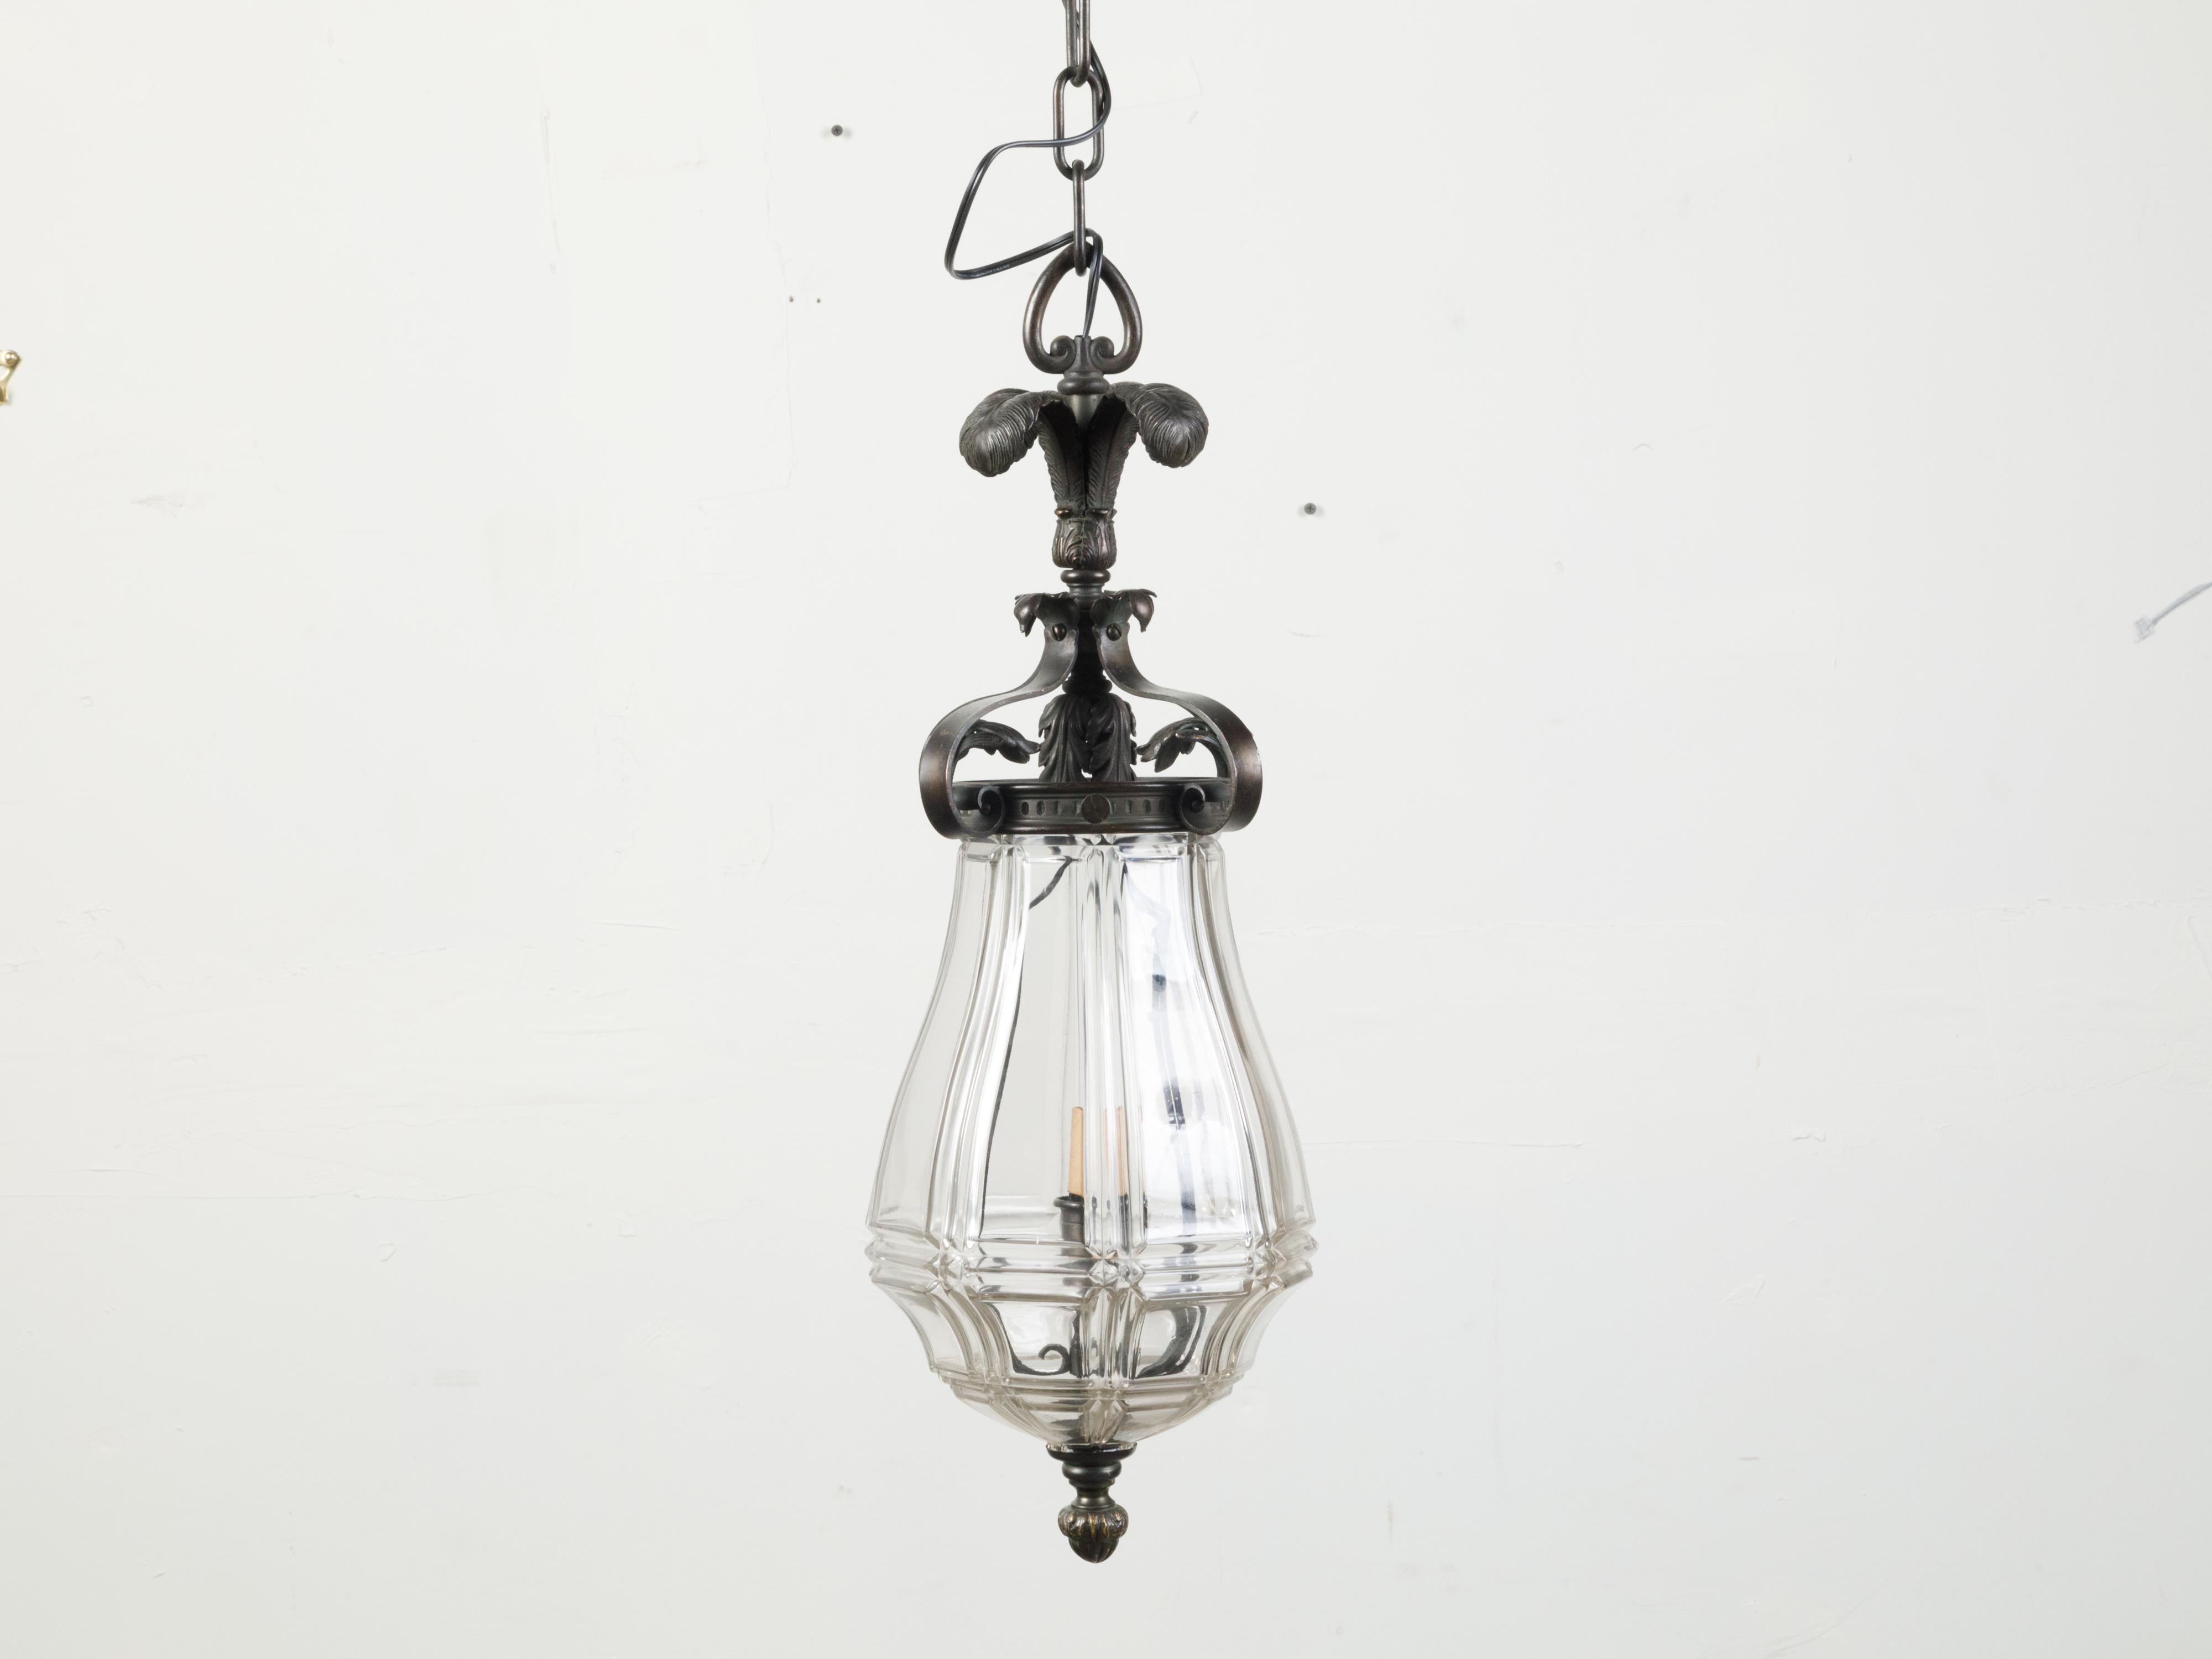 A French bronze and glass lantern from the early 20th century, with feathers and acanthus leaf motifs. Created in France during the first quarter of the 20th century, this lantern features three bronze feathers connected to graceful scrolls